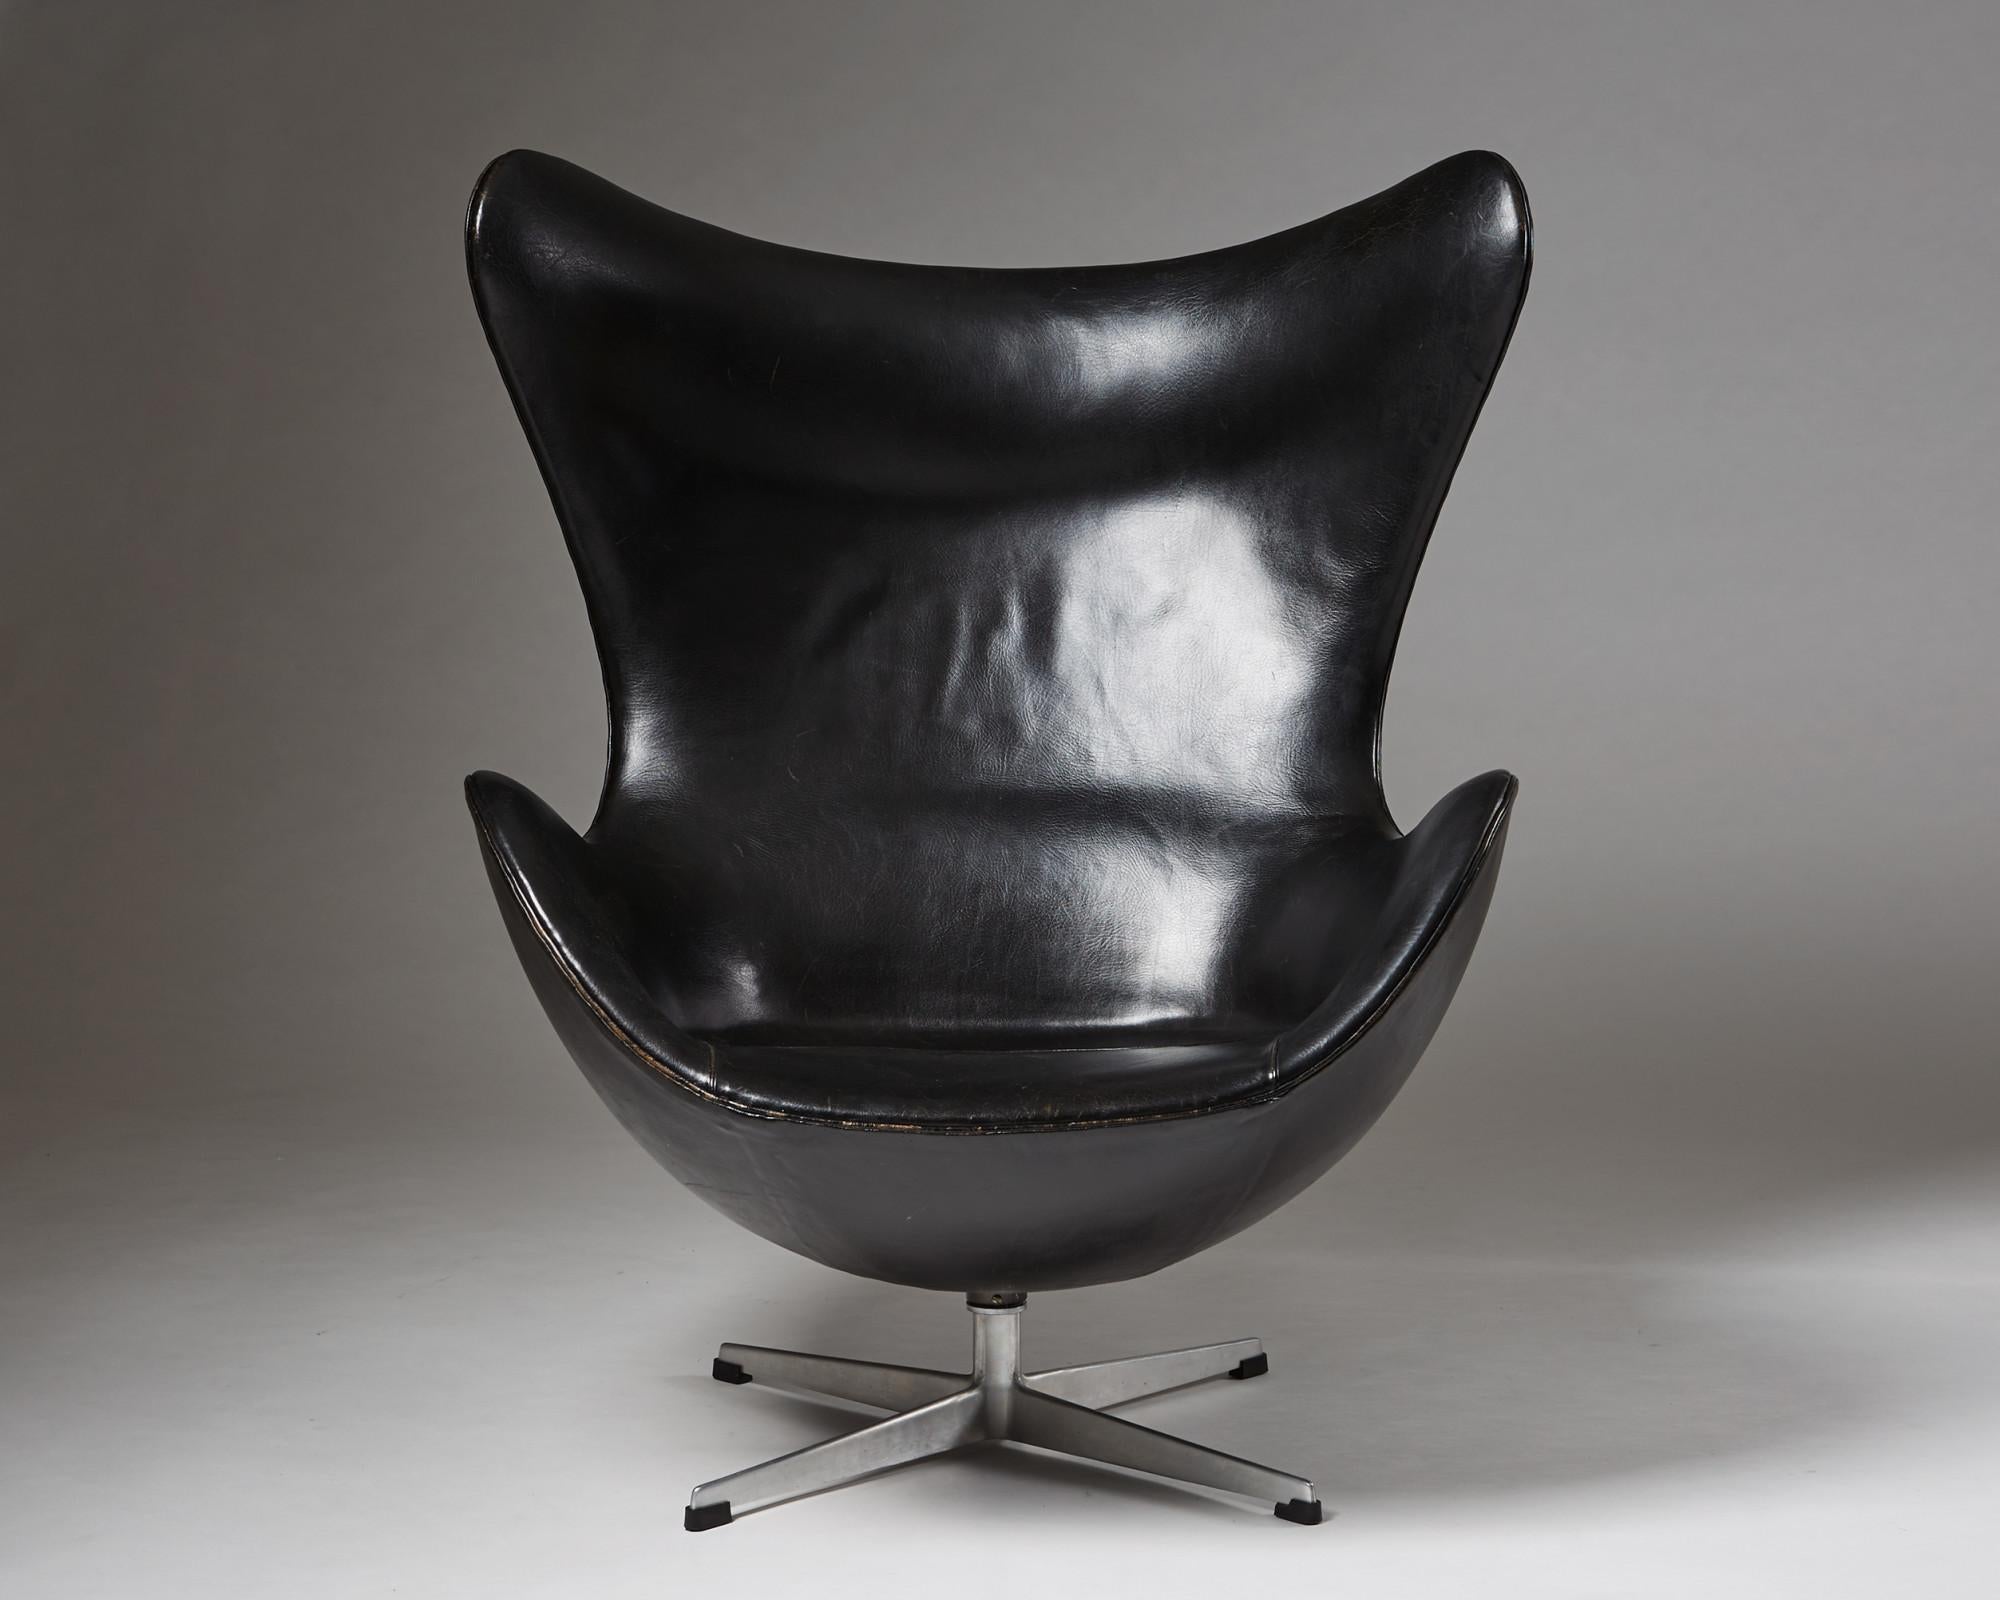 Armchair “Egg chair” designed by Arne Jacobsen for Fritz Hansen,
Denmark. 1958.

Original leather and aluminium.

Very early model with the built up seat, without separate cushion.

Stamped in white to the underside of the leather.

Measurements: